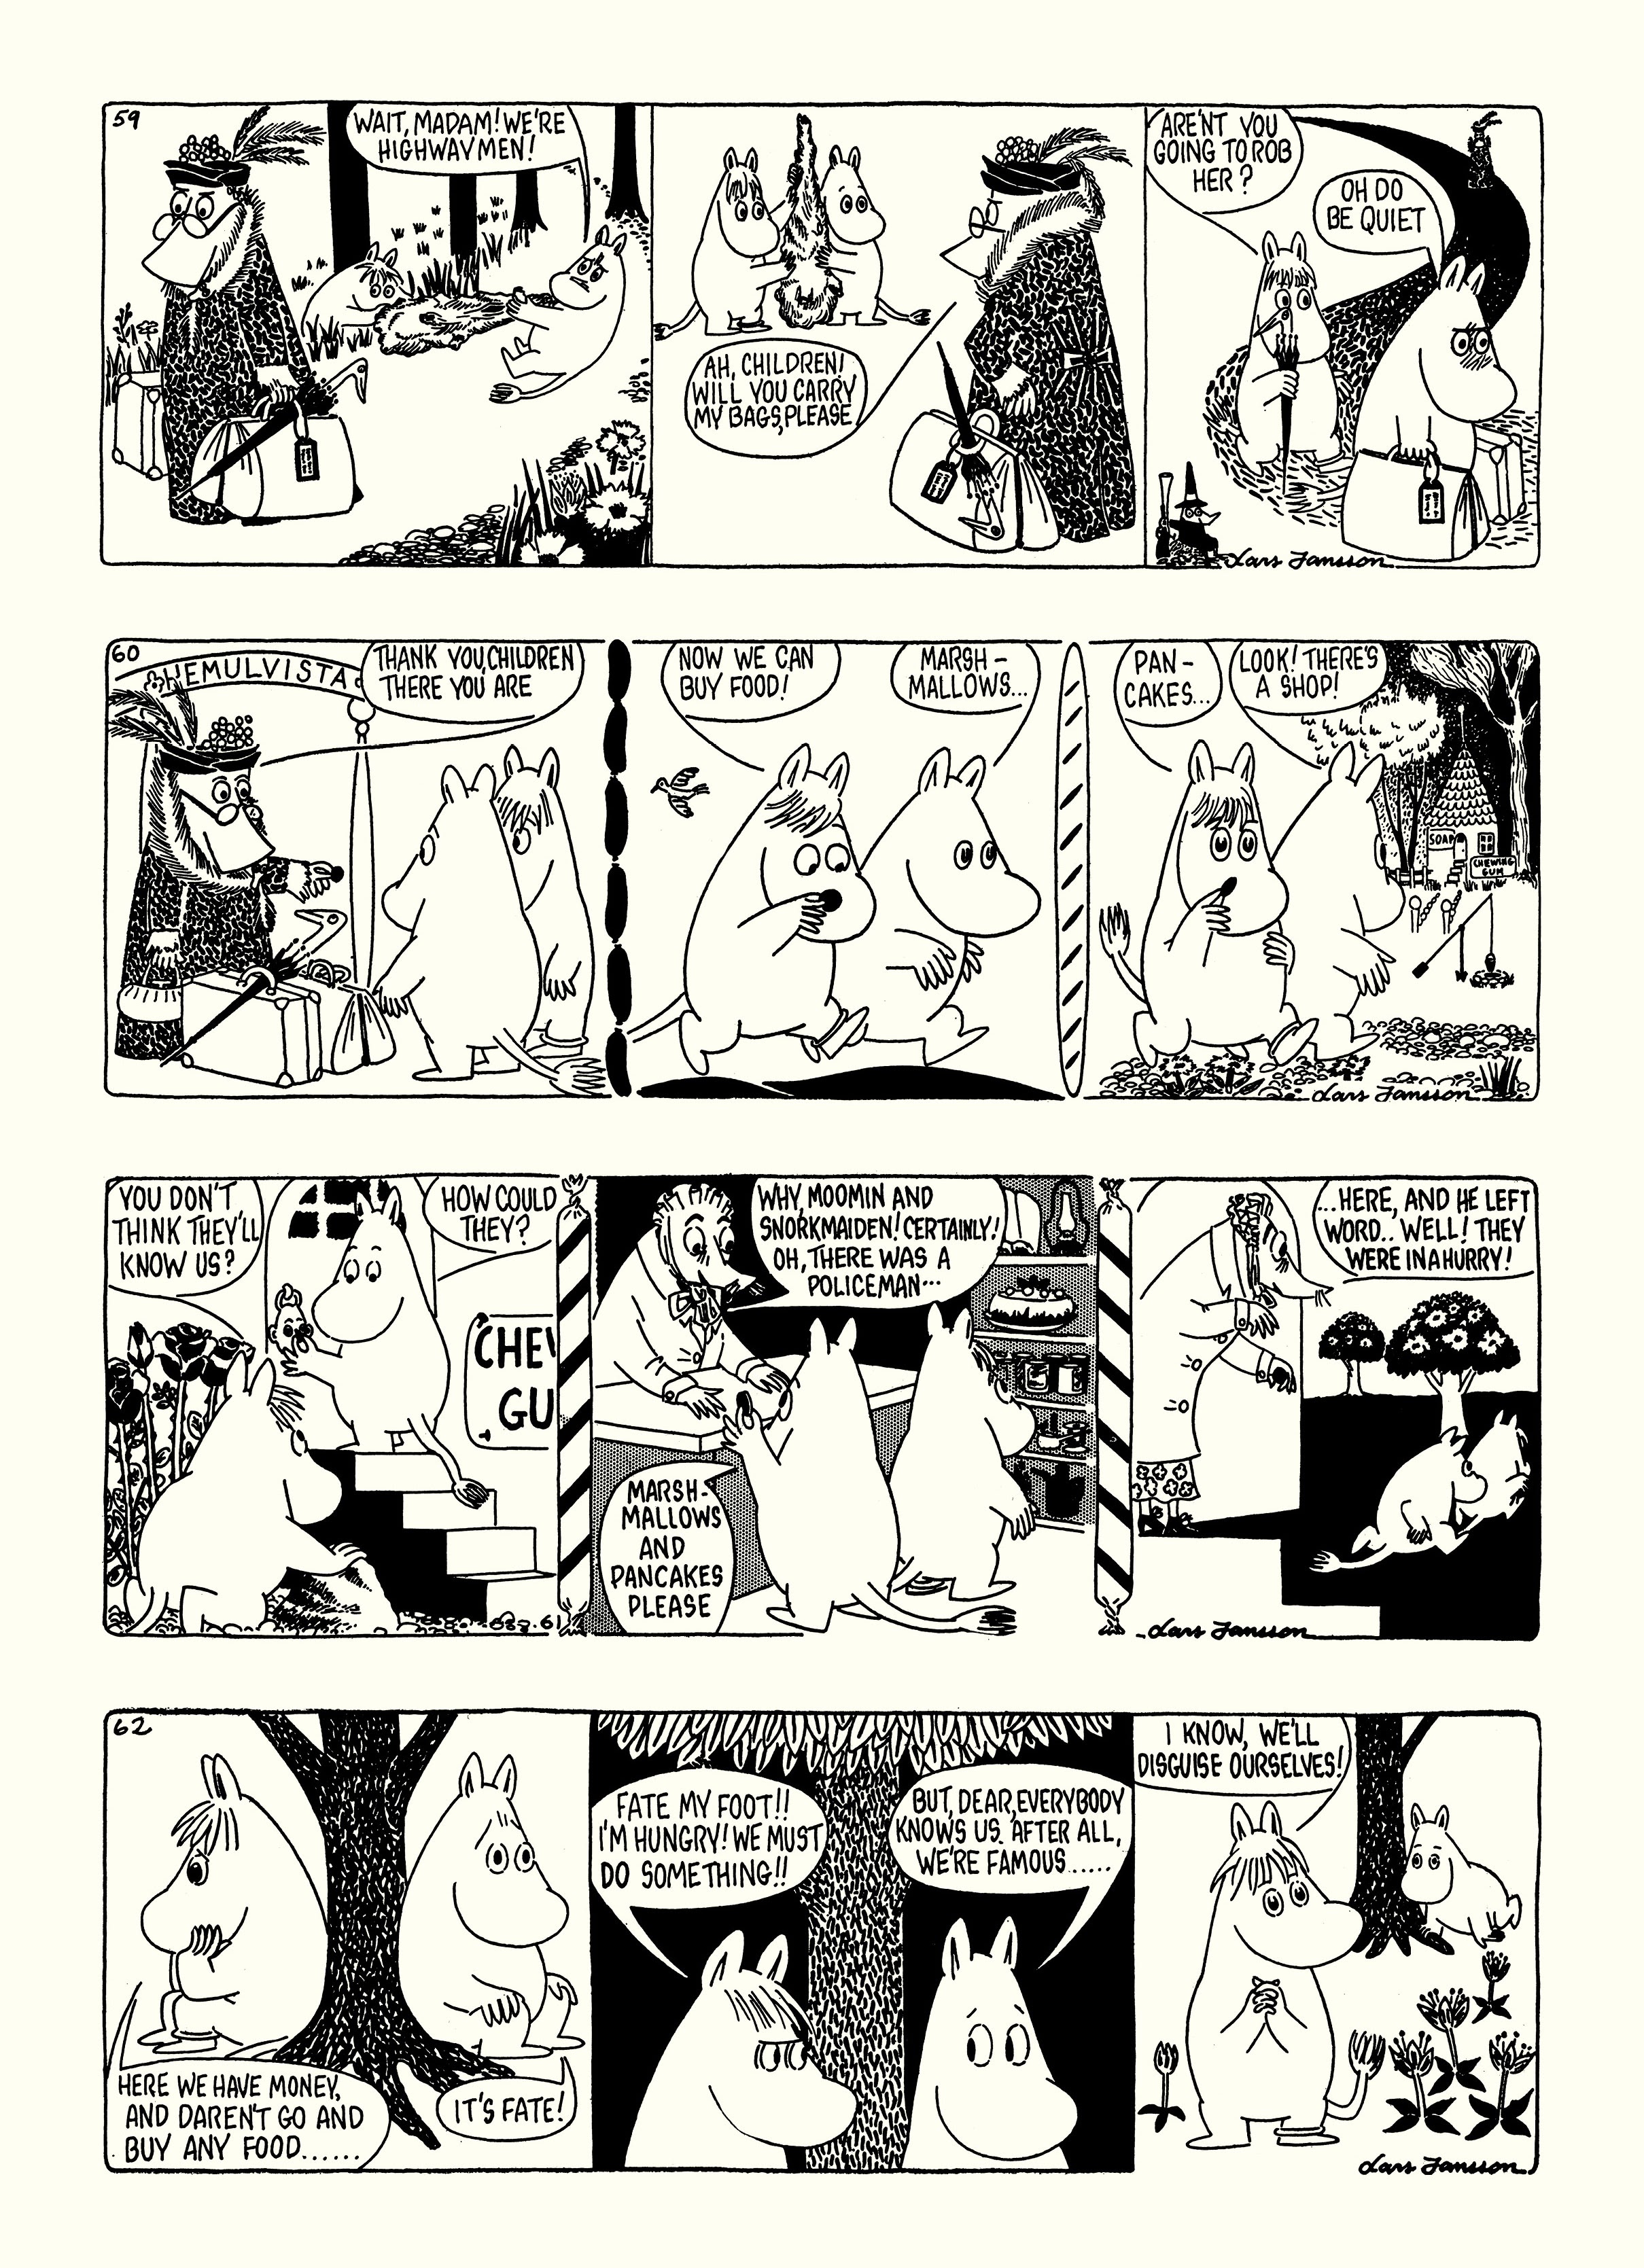 Read online Moomin: The Complete Lars Jansson Comic Strip comic -  Issue # TPB 6 - 21